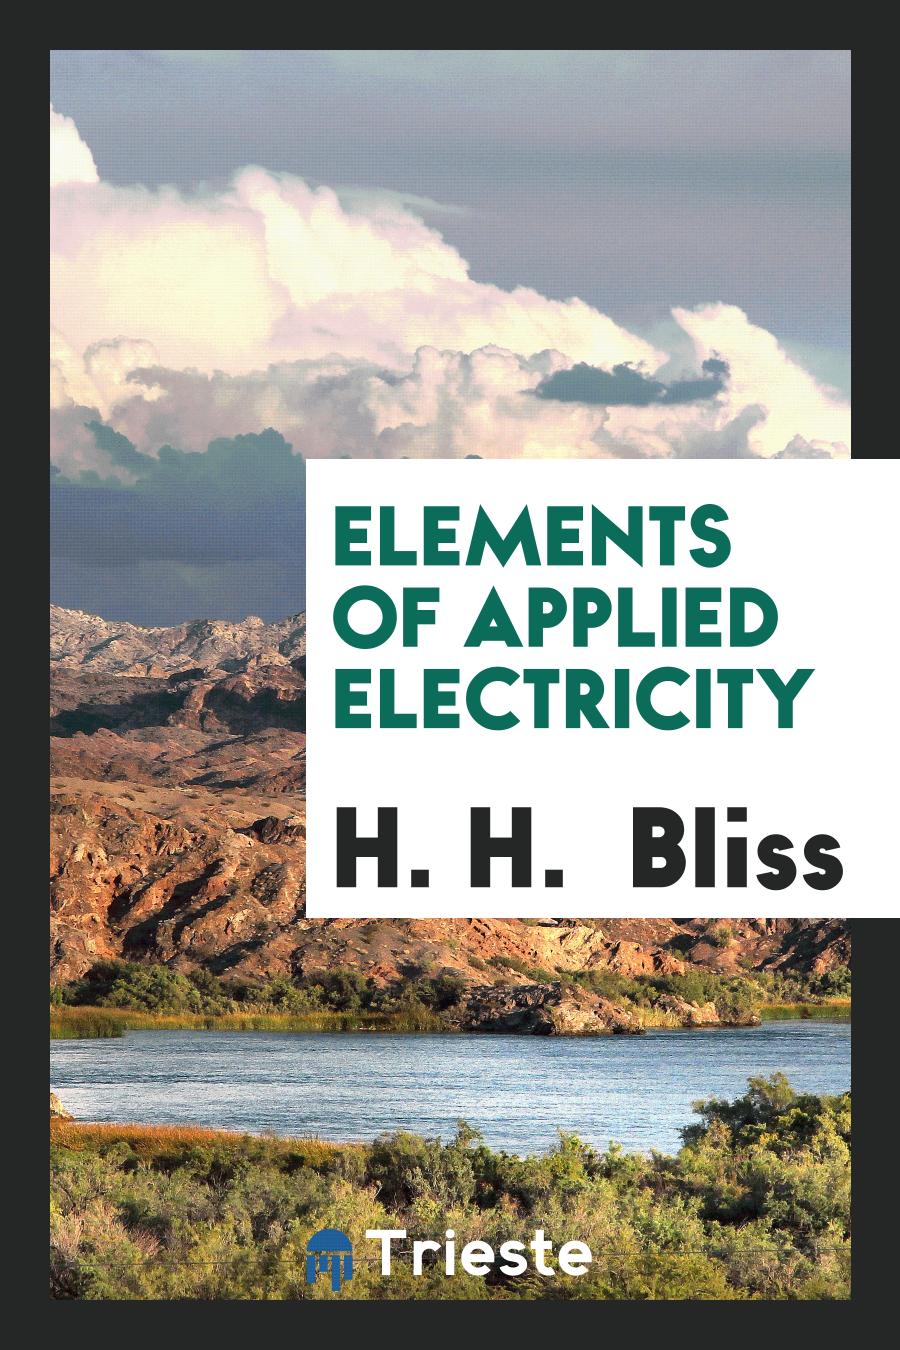 Elements of Applied Electricity